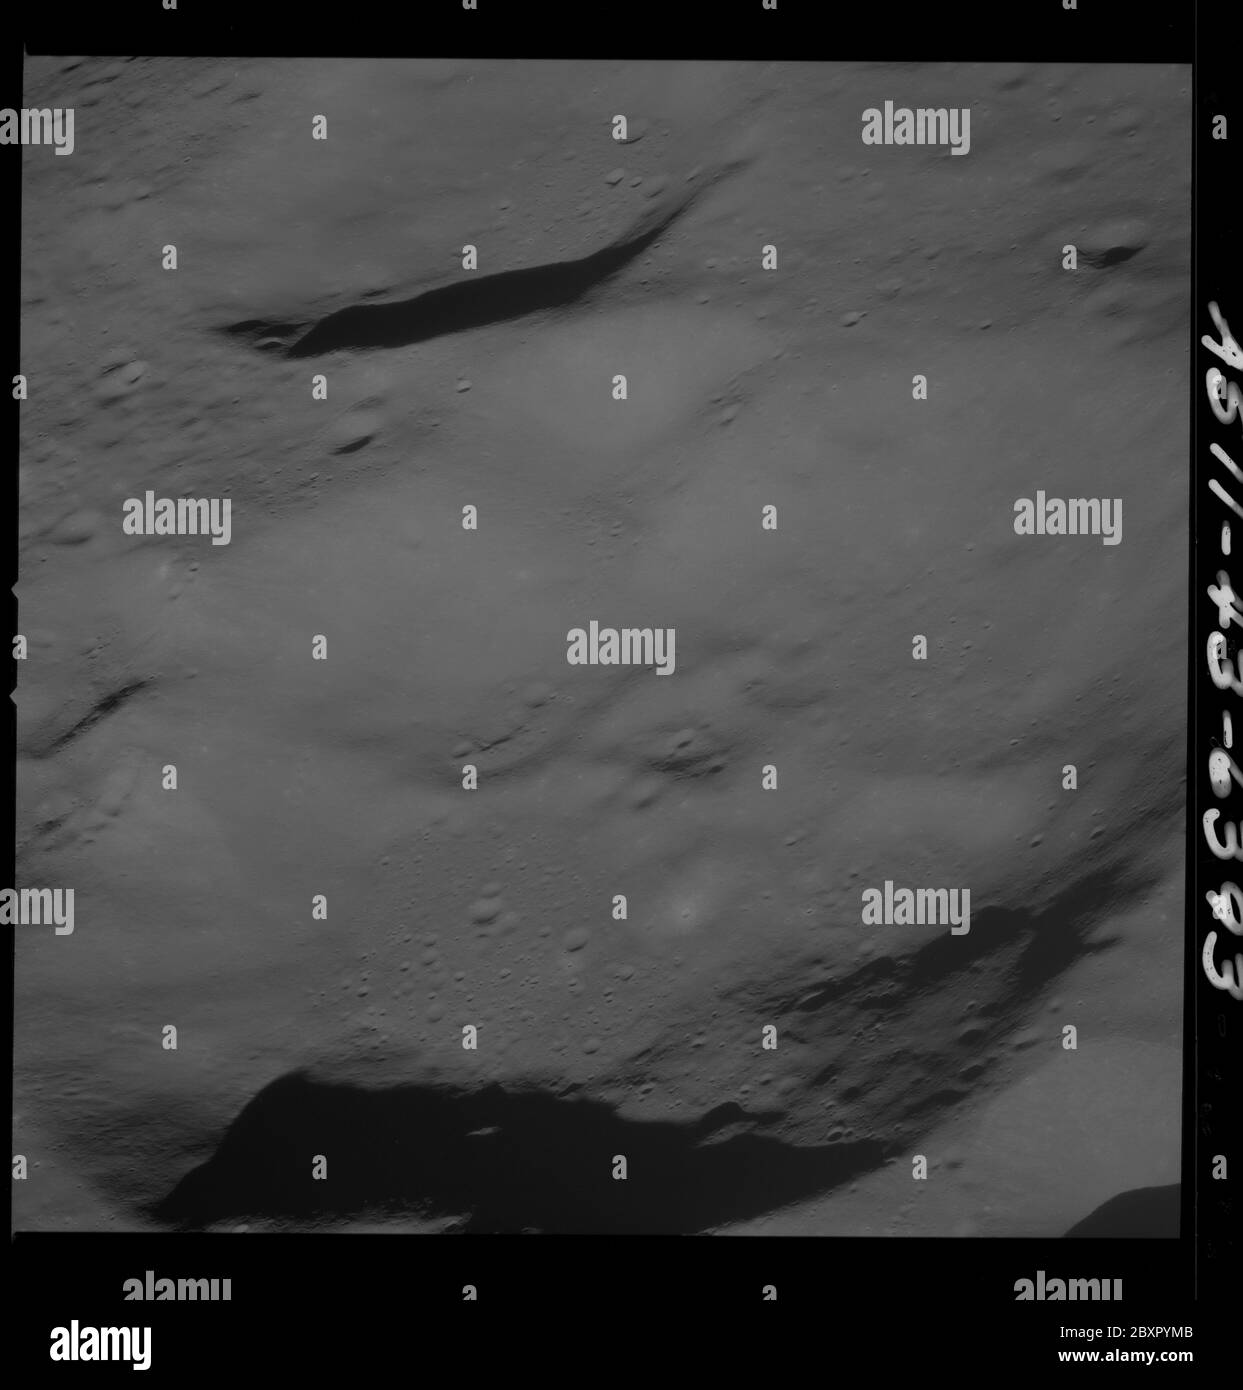 AS11-43-6393 - Apollo 11 - Apollo 11 Mission image - Moon, Southwest of Crater 229; Scope and content:  The original database describes this as: Description: View of Moon,Southwest of Crater 229,officially named Krasovskij. Image take from the Command Module at approximately 60 nautical miles orbital altitude during the Apollo 11 Mission.  Original film magazine was labeled T. Film Type: 3400 Black/White Panatomic-X film on a 2.5 mil Estar polyester base taken with a 250mm lens. Approximate Photo Scale: 1:583,000. Principal Point Latitude 1 degrees North,Longitude 177 degrees West. Foward over Stock Photo